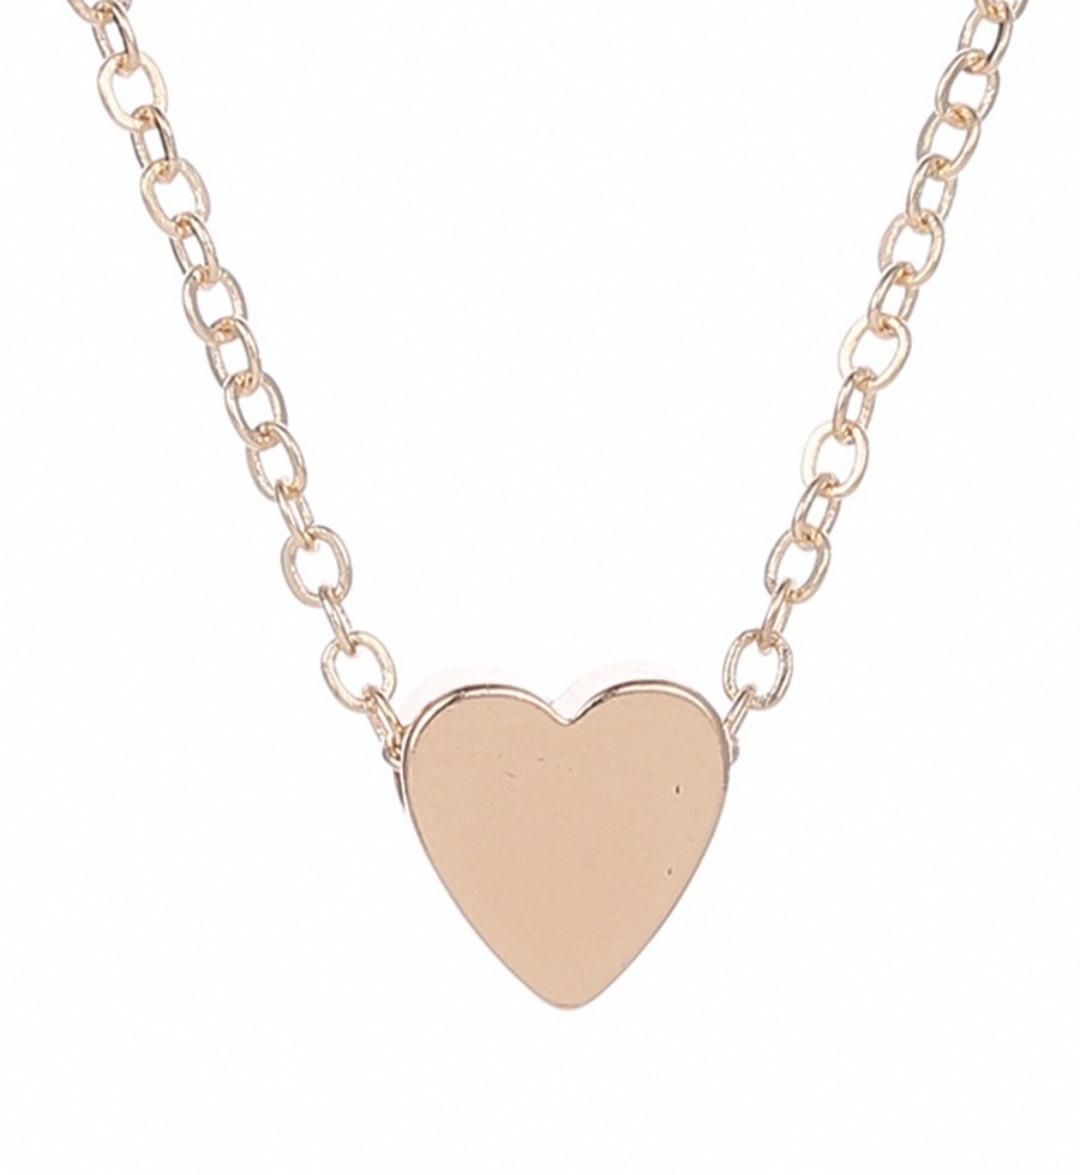 AVR JEWELS Heart Chain Necklace For Women - Deal IND.